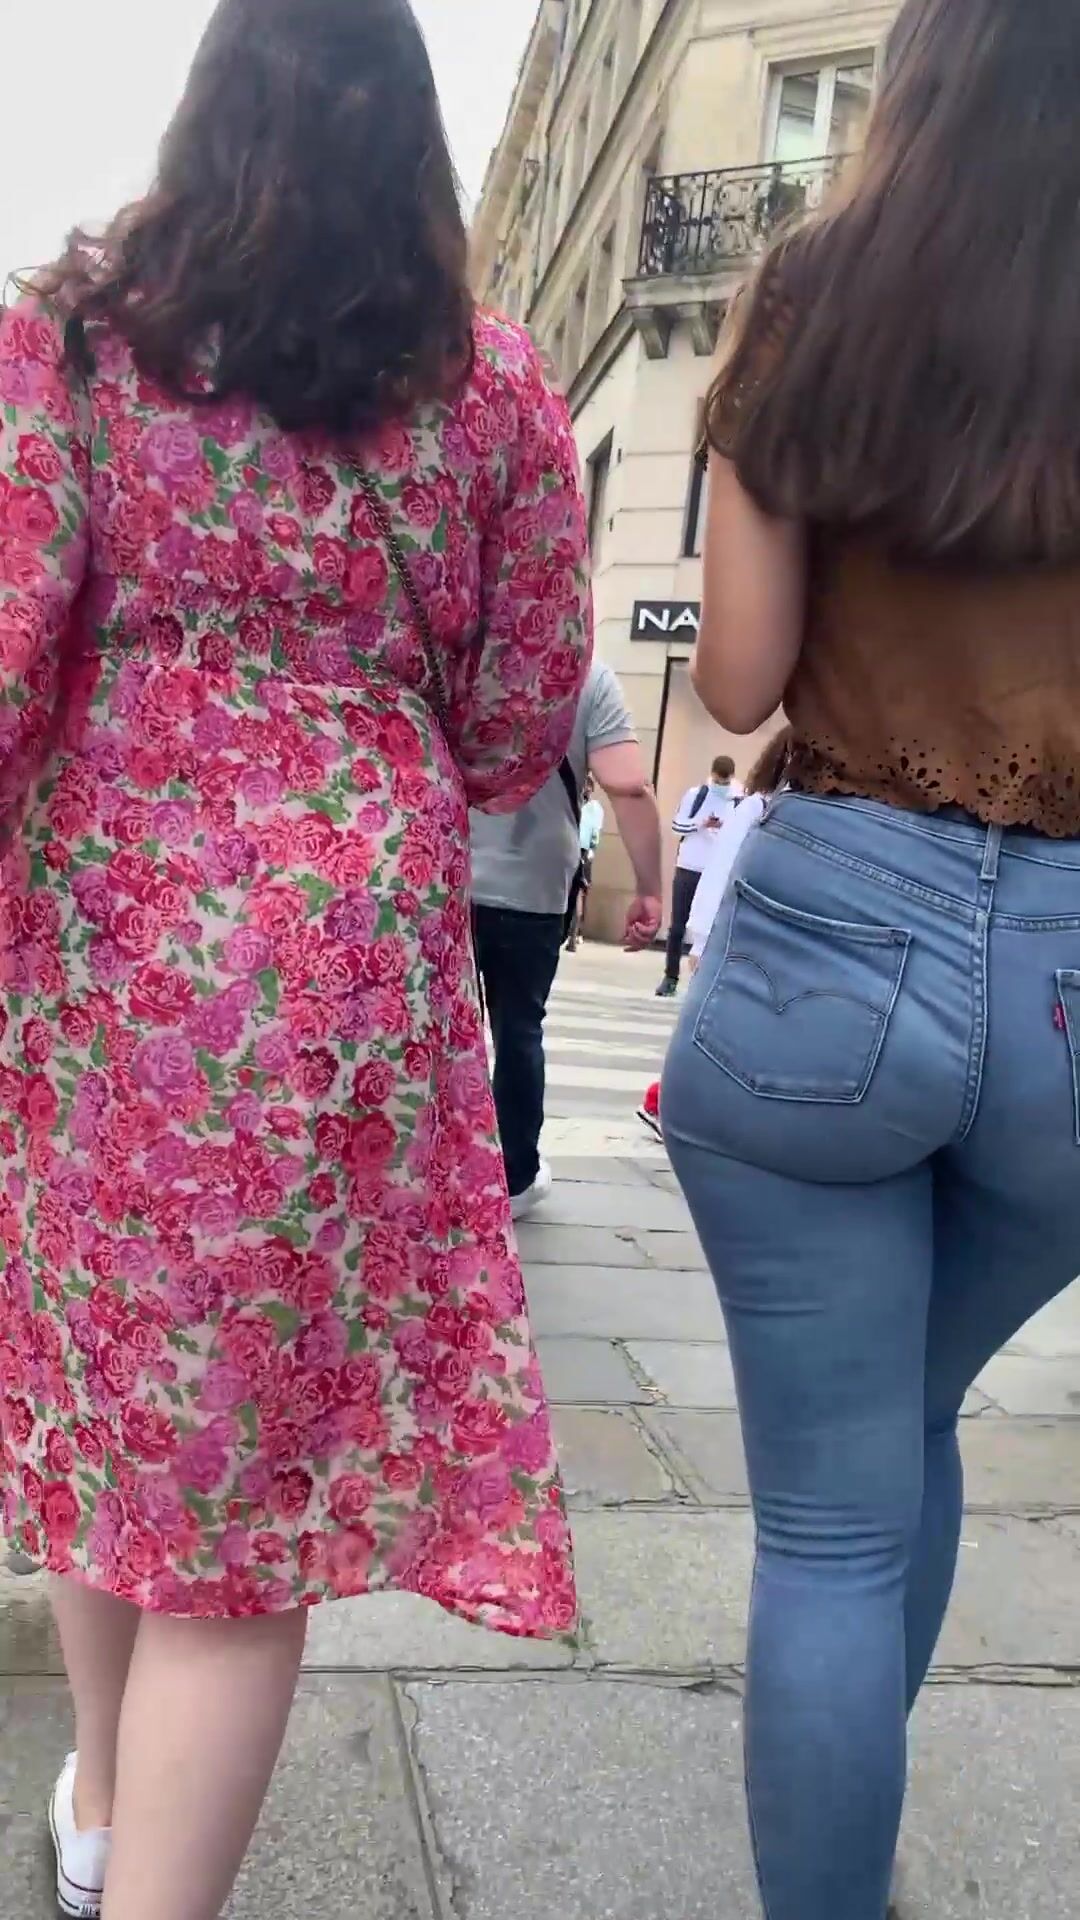 Tall PAWG in jeans